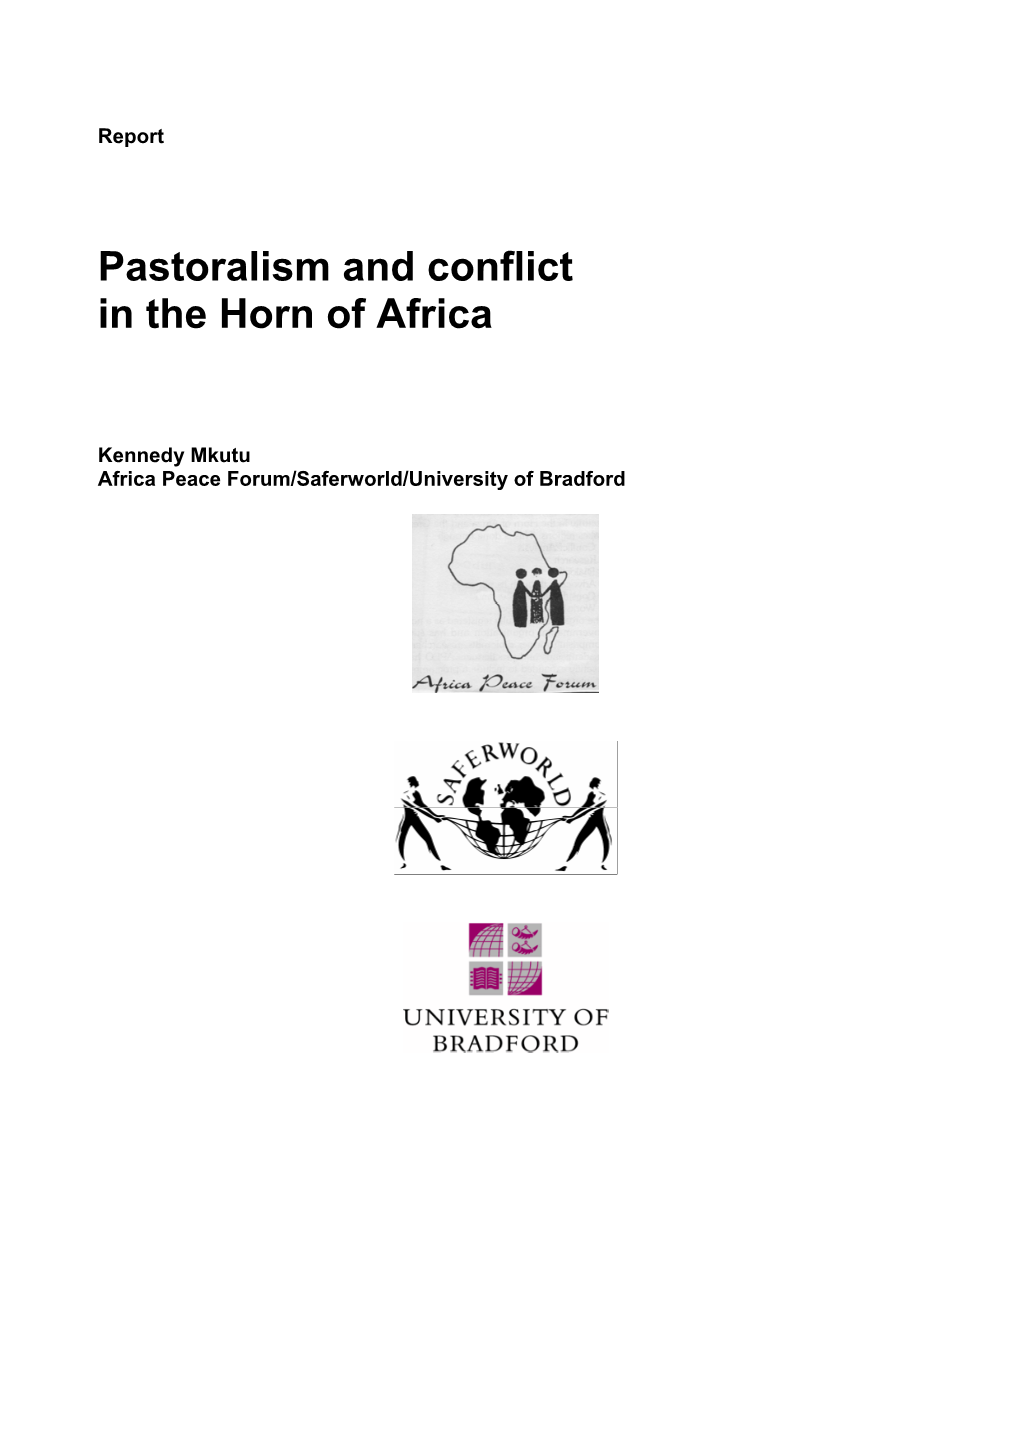 Pastoralism and Conflicts in the Horn of Africa